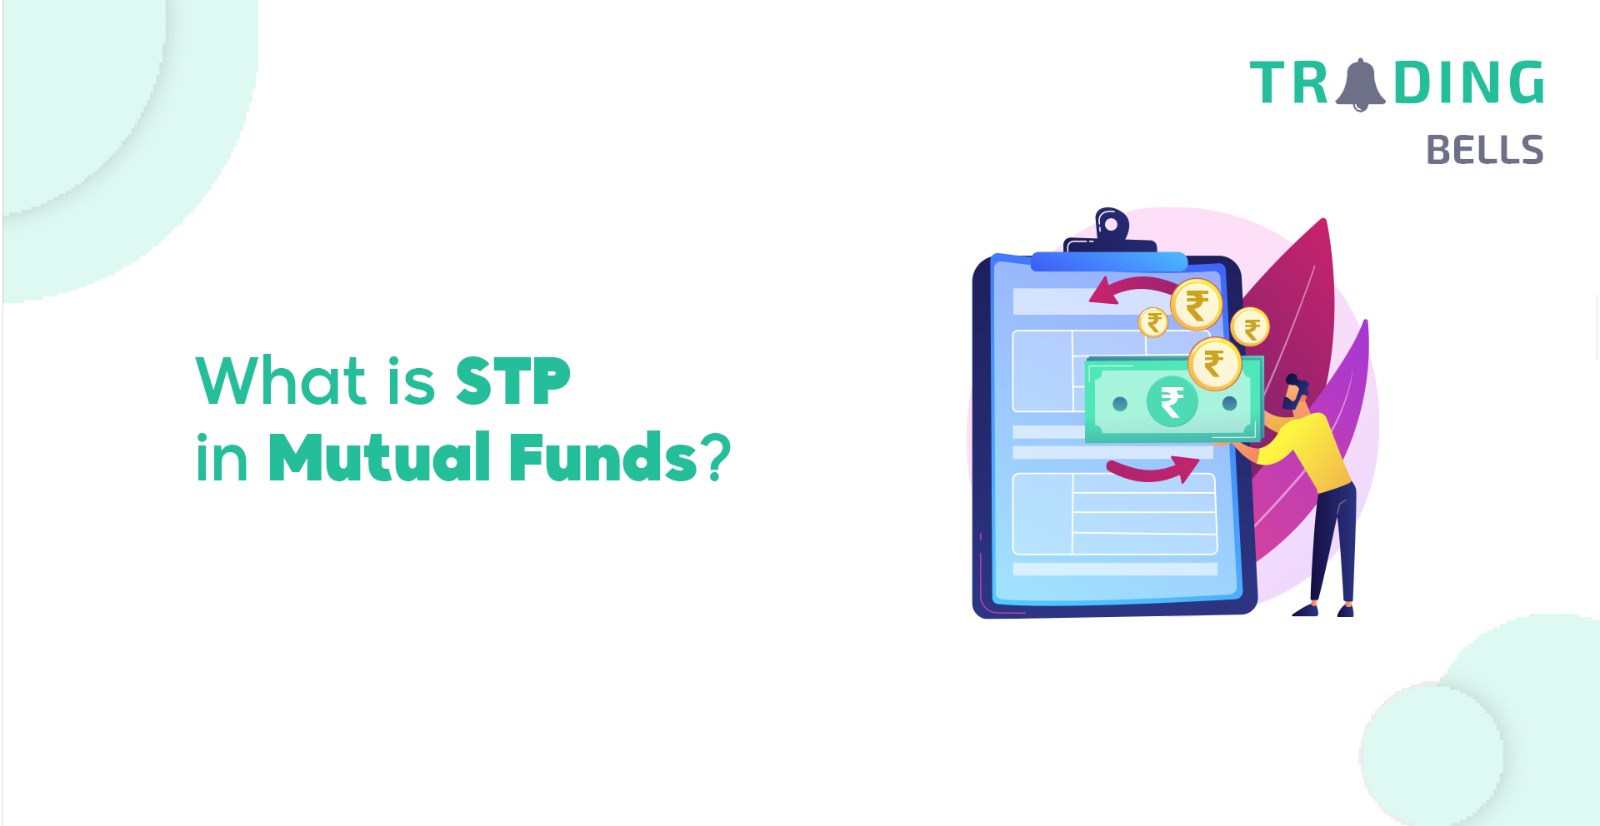 What is STP in Mutual Funds